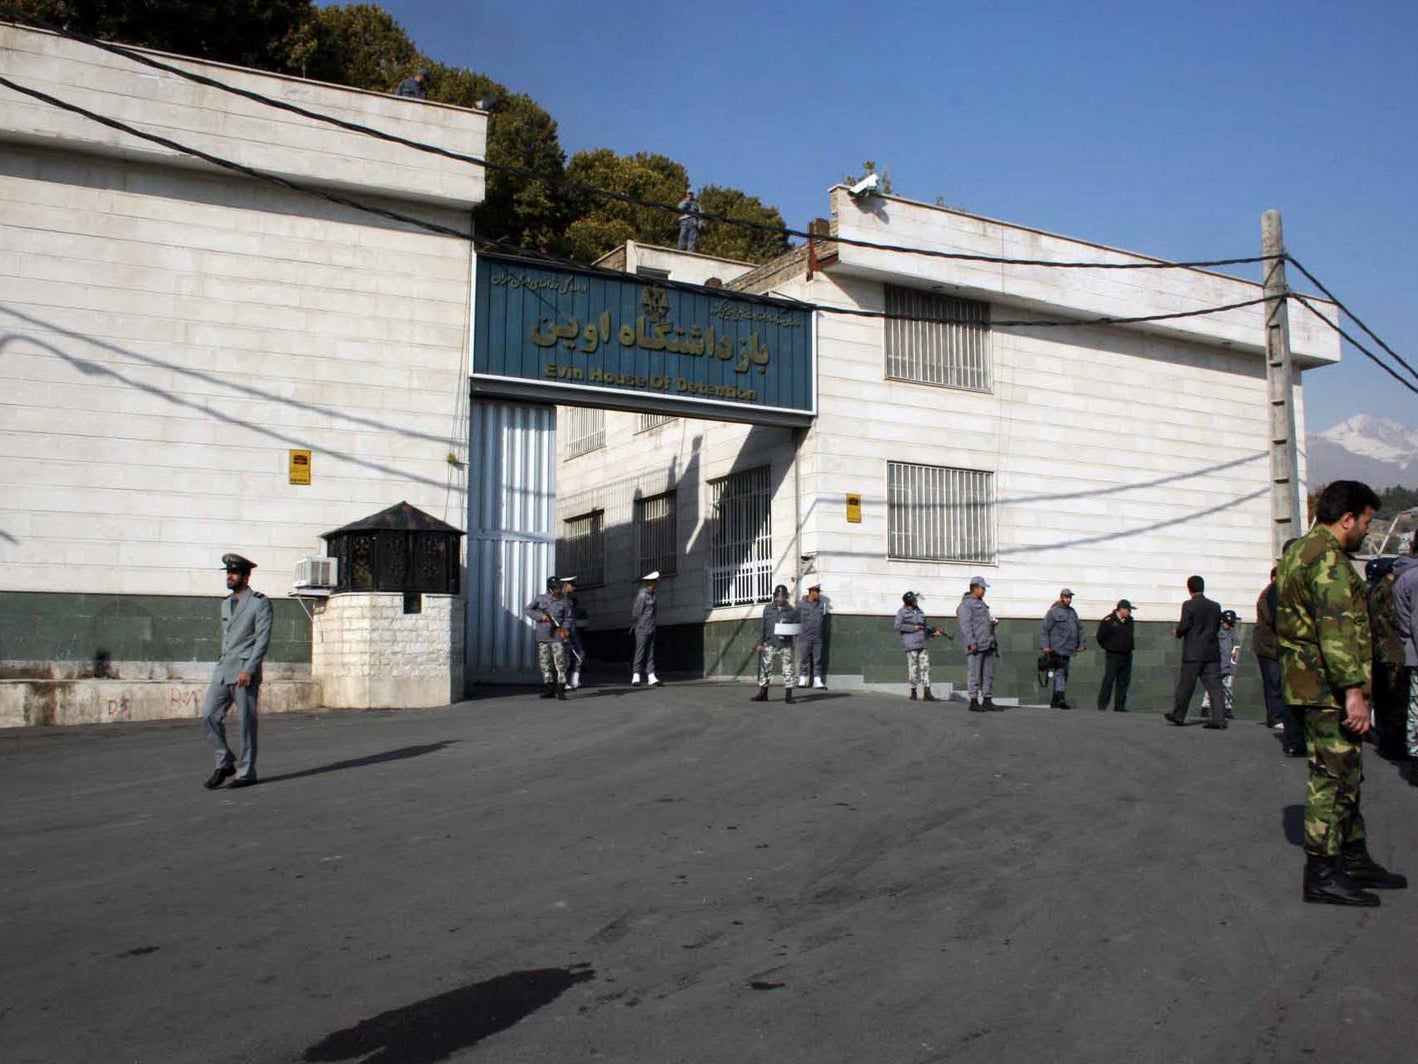 Evin Prison in Tehran, where the women are said to be detained